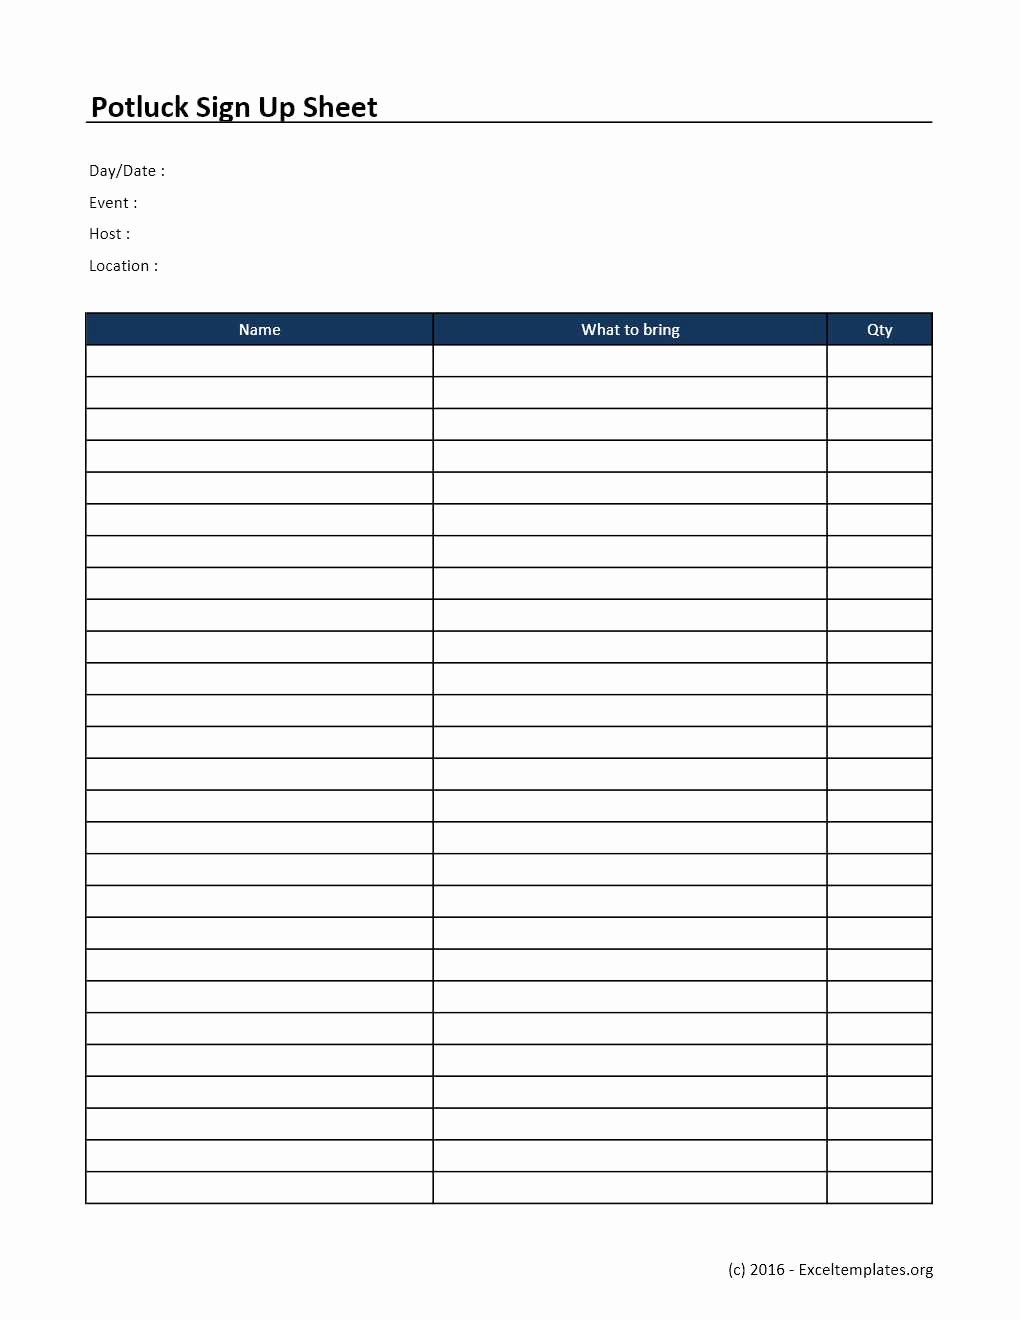 Potluck Signup Sheet Template Excel Awesome Potluck Sign Up Sheet Template Excel Templates